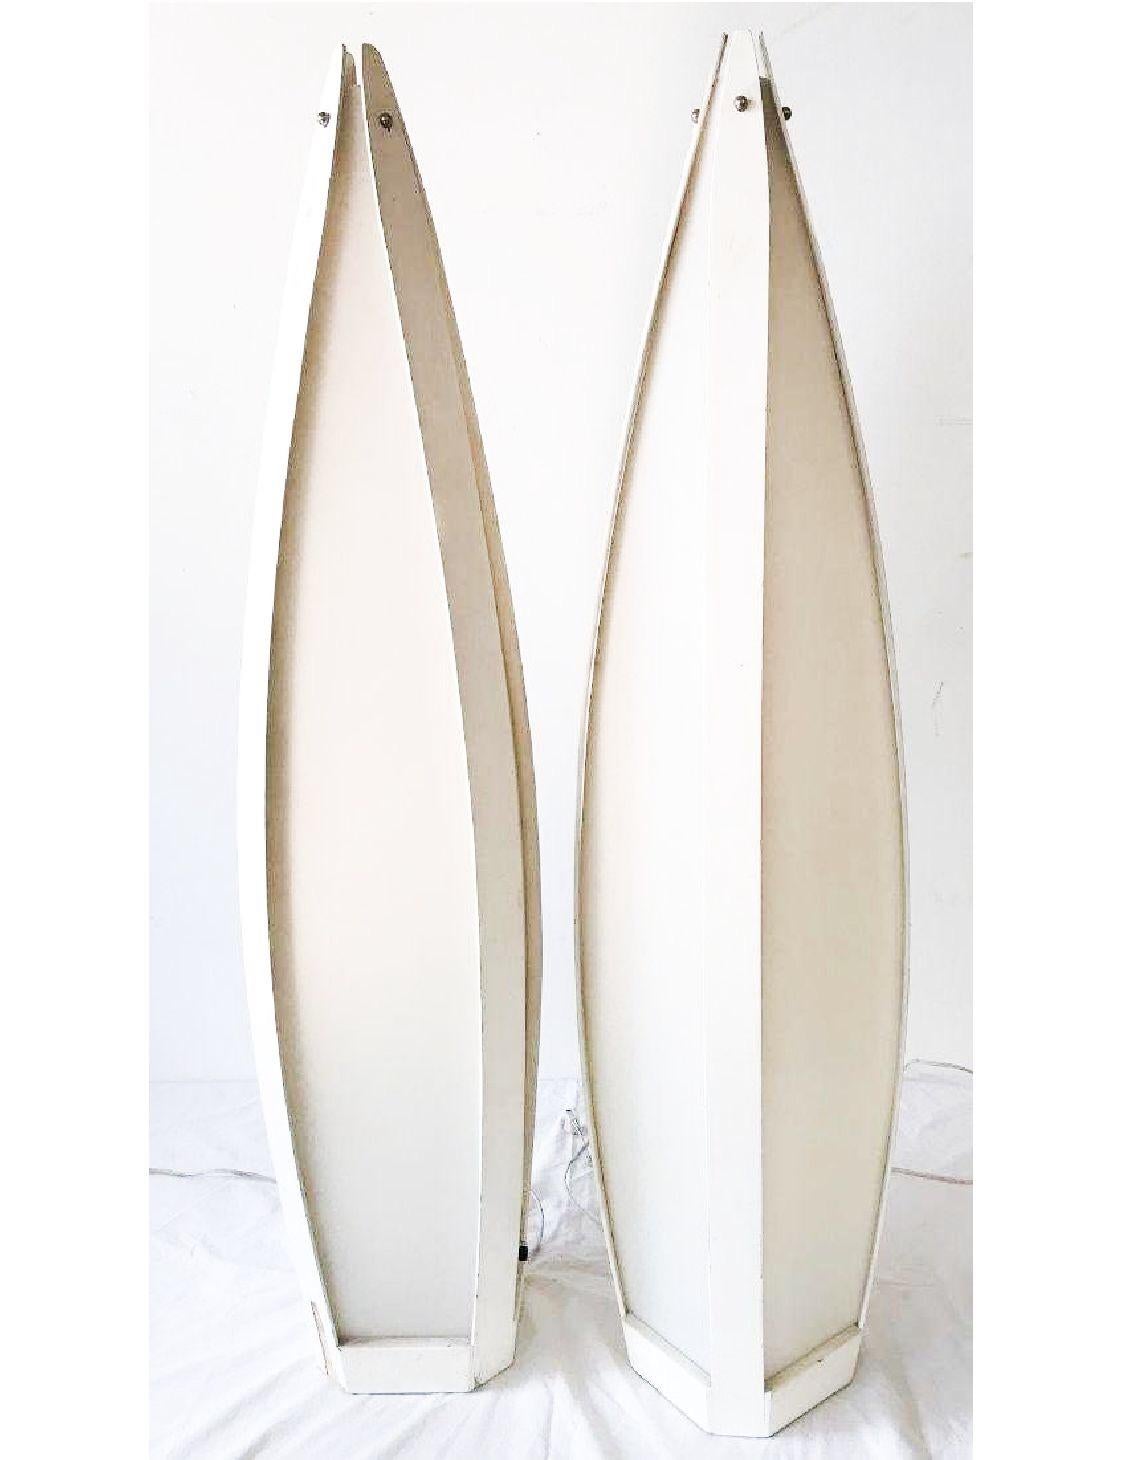 Gorgeous sculptural Mid-Century Modern, monumental floor or table lamps / lanterns by Modeline of California. Modeline of California was a small company founded in 1957 by Bernie Roberts. Their specialty was in making and designing several